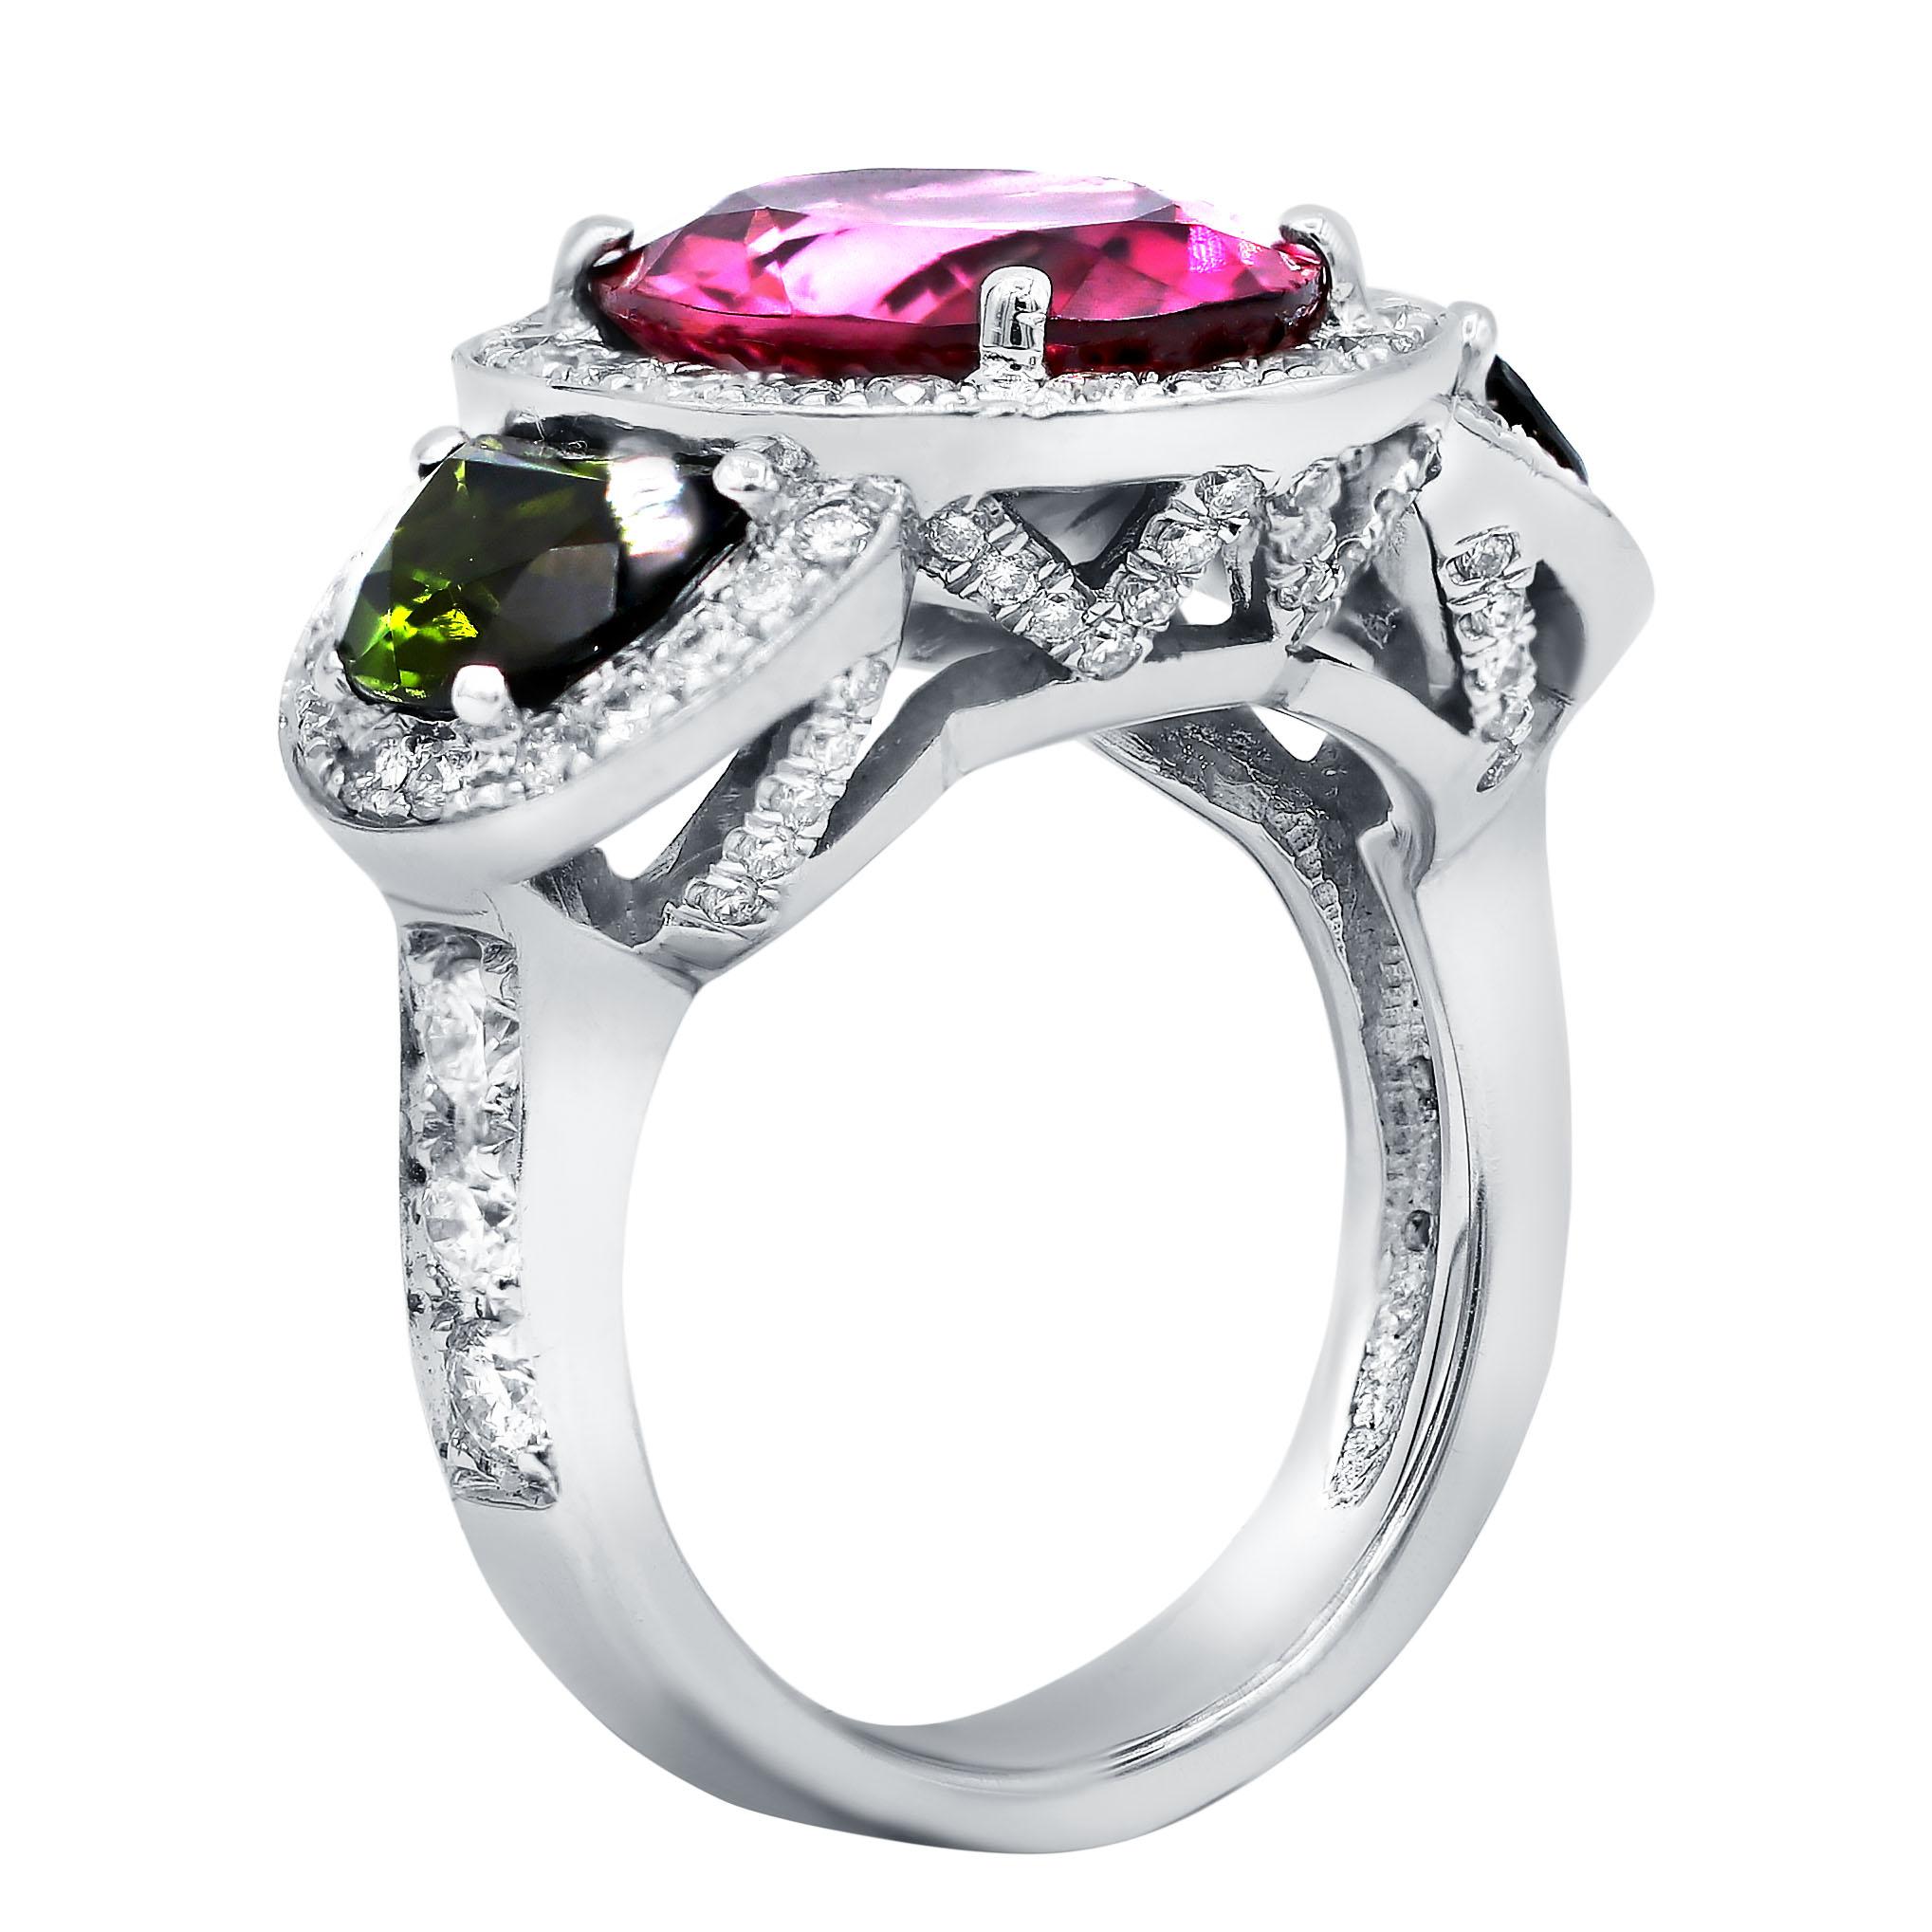 18 kt white gold tourmaline and diamond ring featuring a 5.62 ct oval cut pink tourmaline with two half-moon shaped green tourmalines totaling 3.73 cts surrounded by 1.50 cts tw of micropave round diamonds.
Diana M. is a leading supplier of